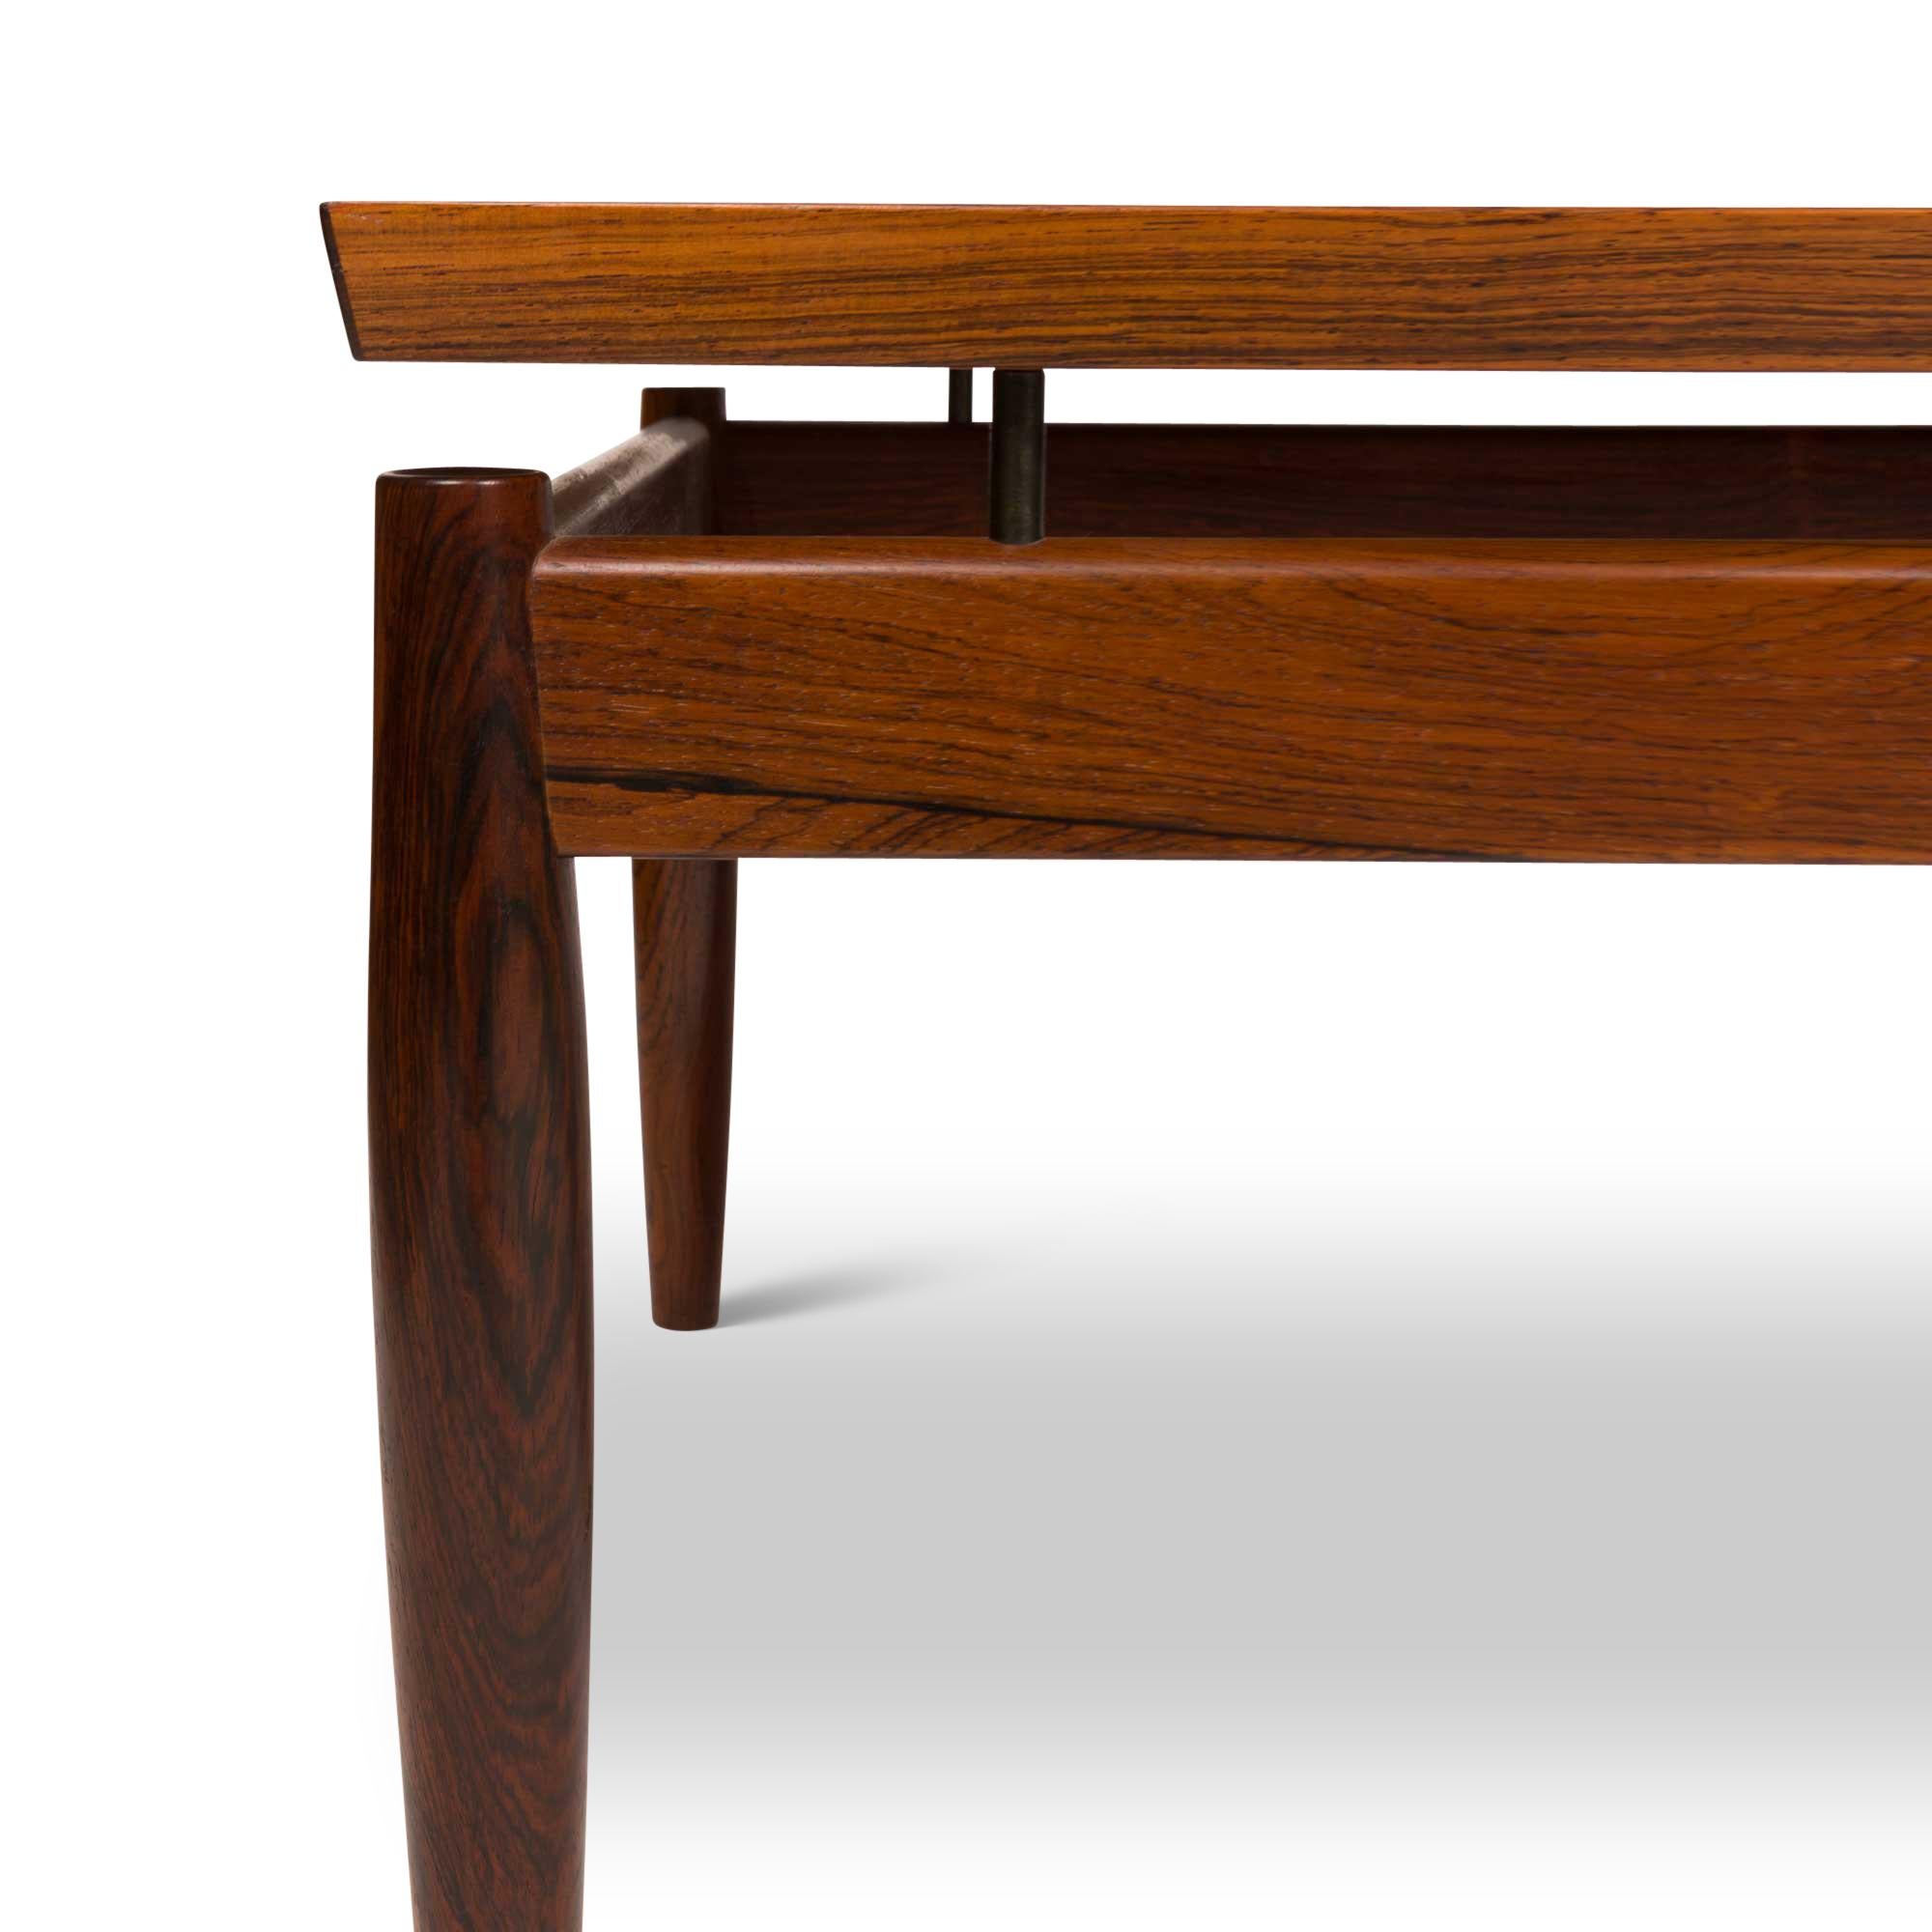 20th Century Vintage Rosewood Floating Top Coffee Table by Grete Jalk for France & Søn Denmar For Sale